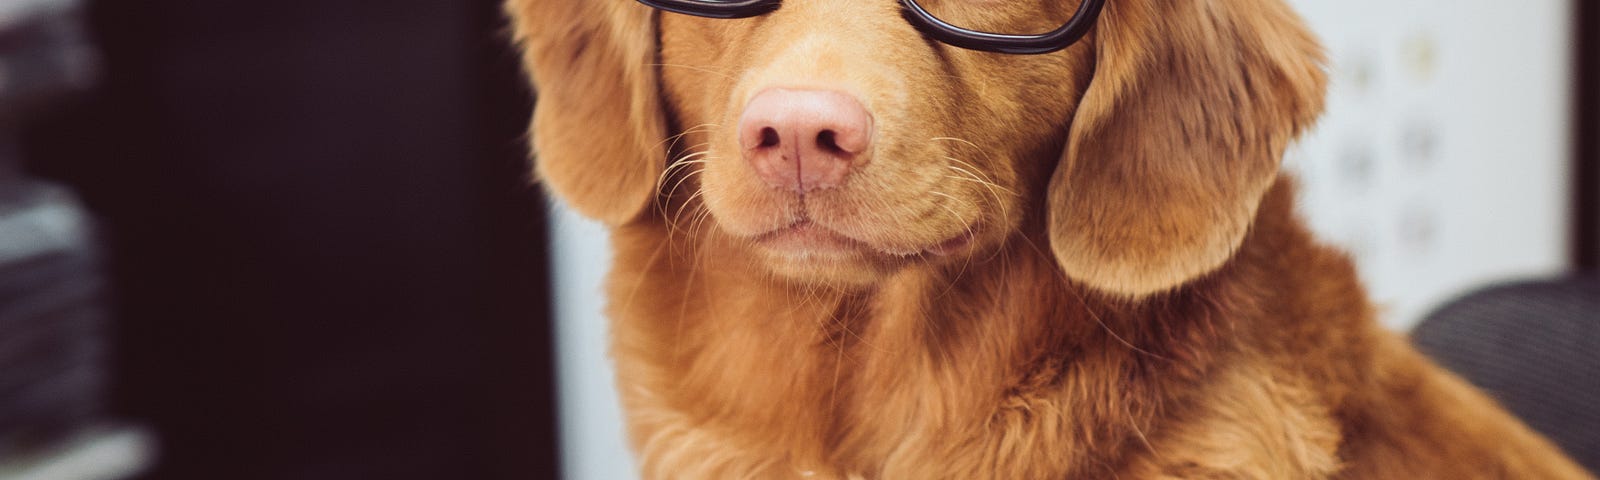 Young dog (maybe a golden retriever) looks at us. The animal wears eyeglasses with black rims and a book is open on a desk at his chest level.